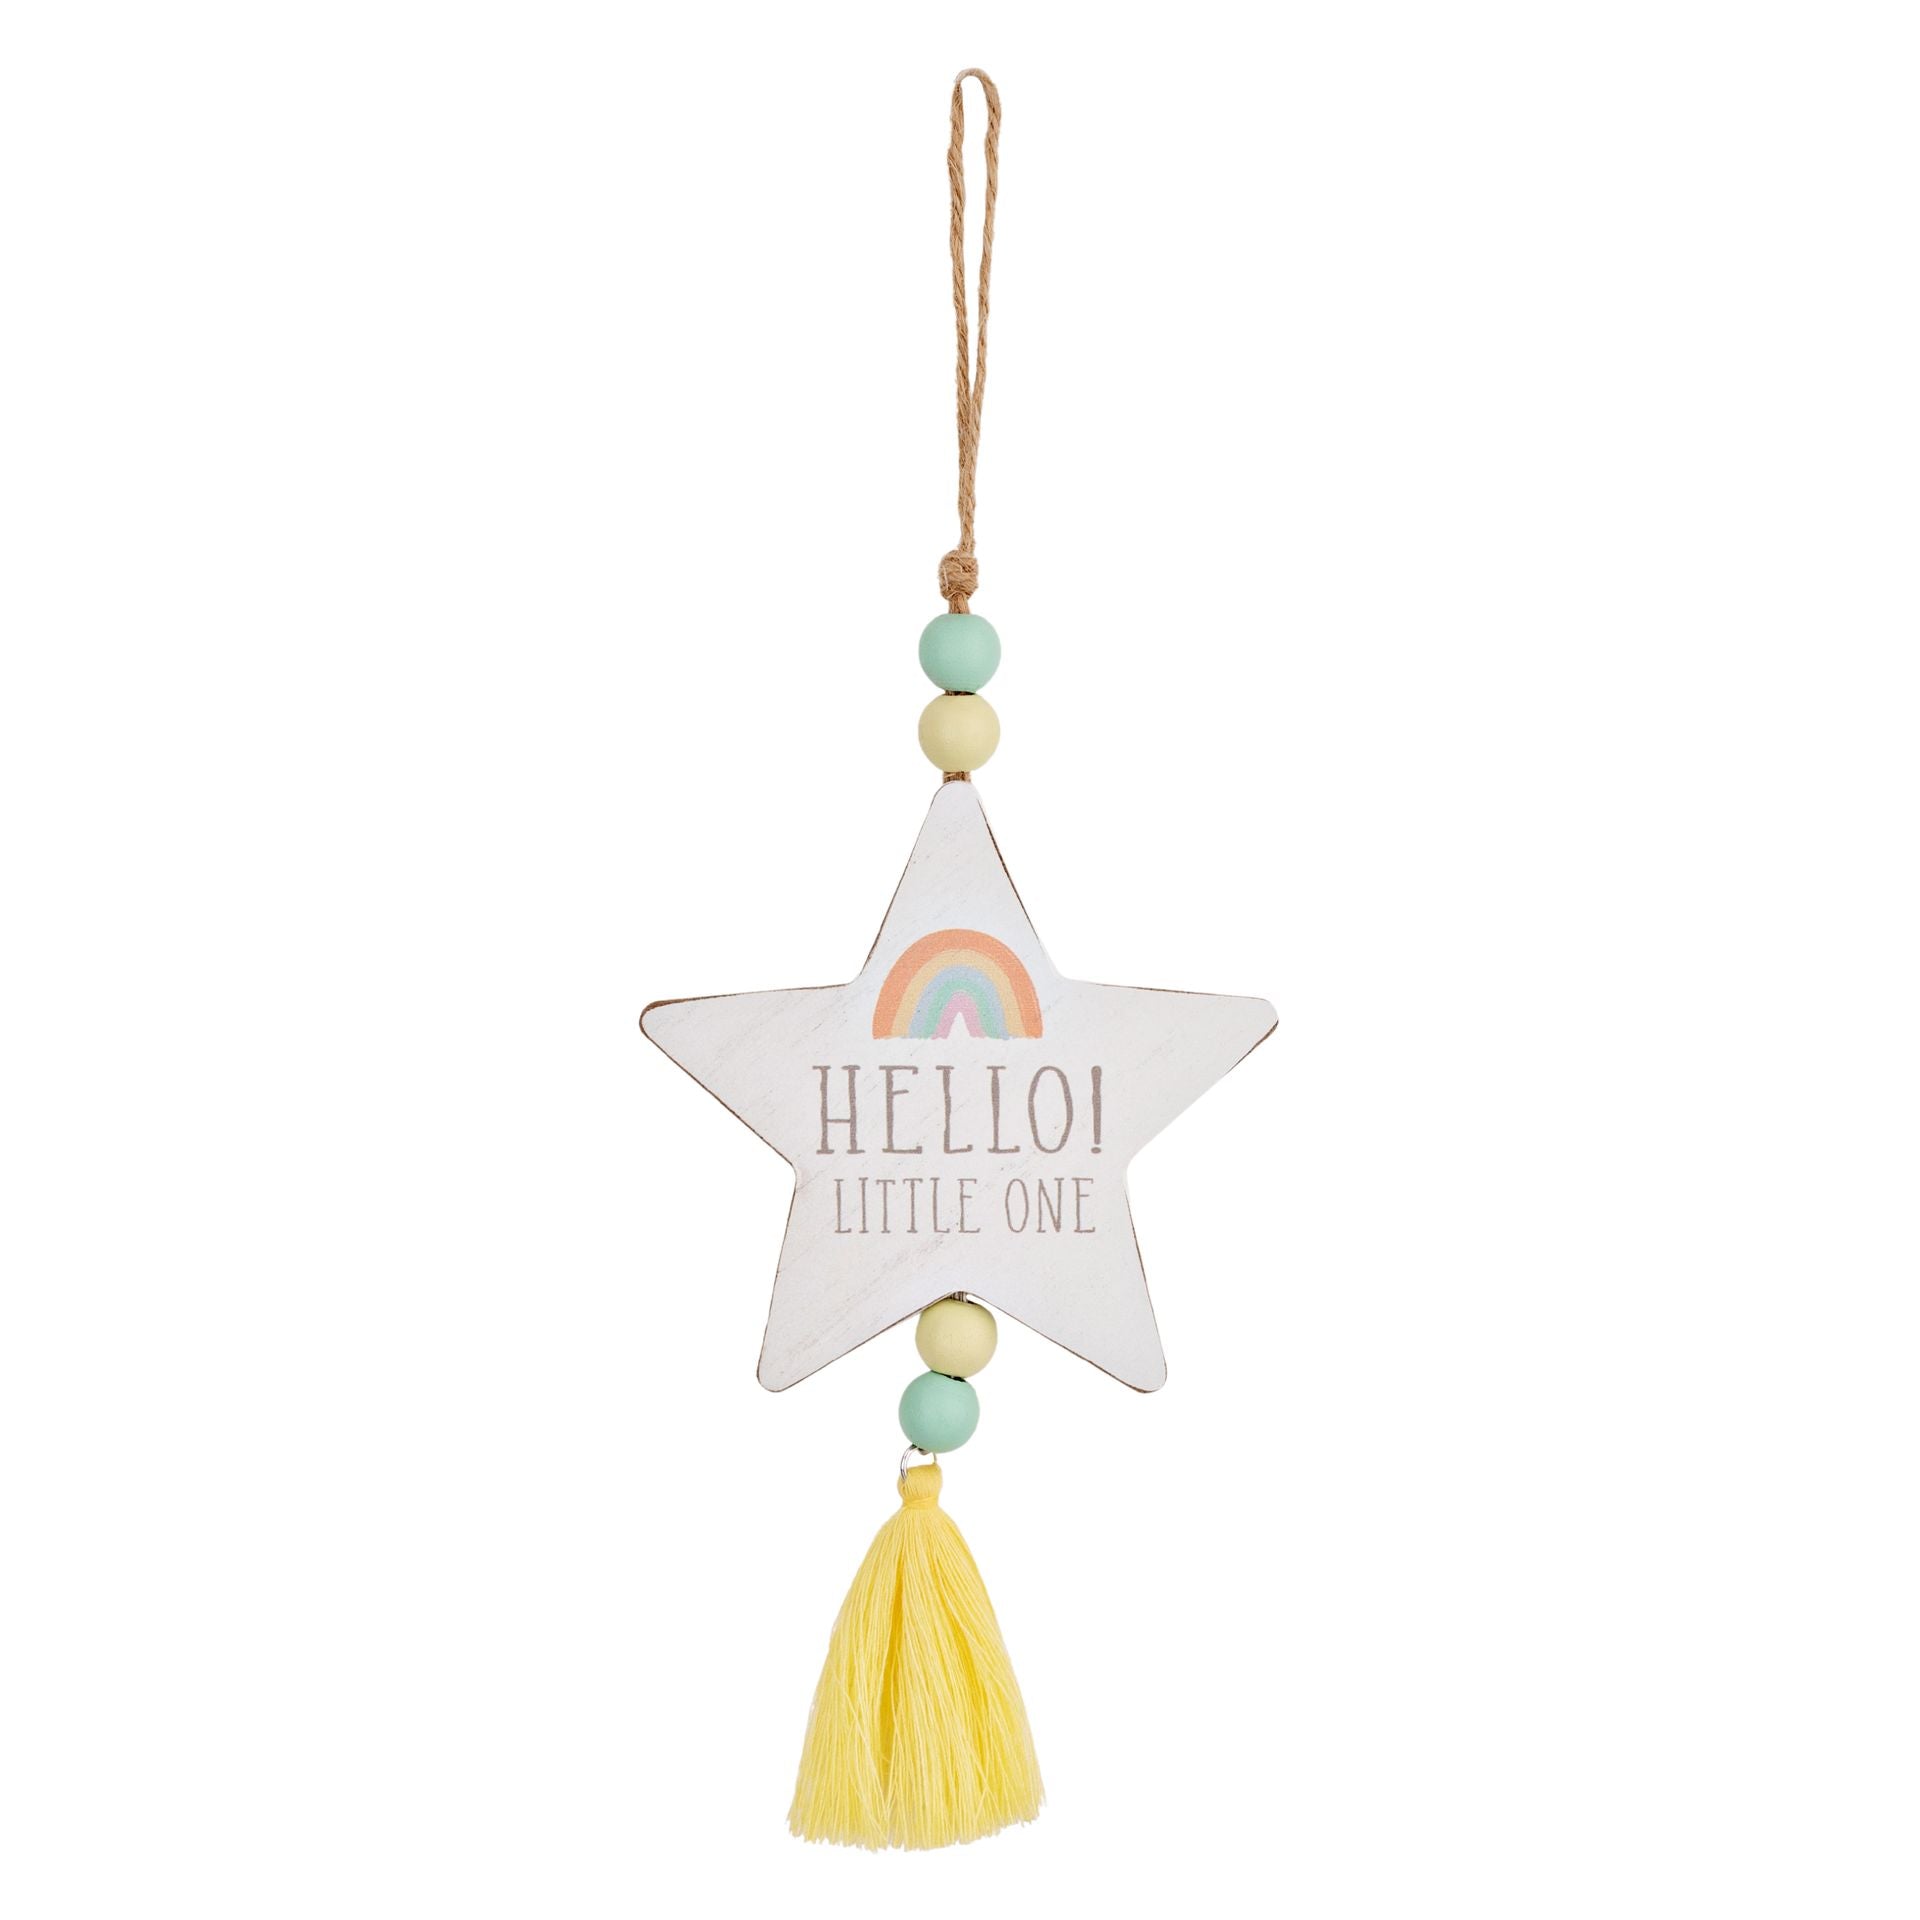 A star planing hanging on beaded thread with a small rainbow and &#39;hello little one&#39; written in the star.